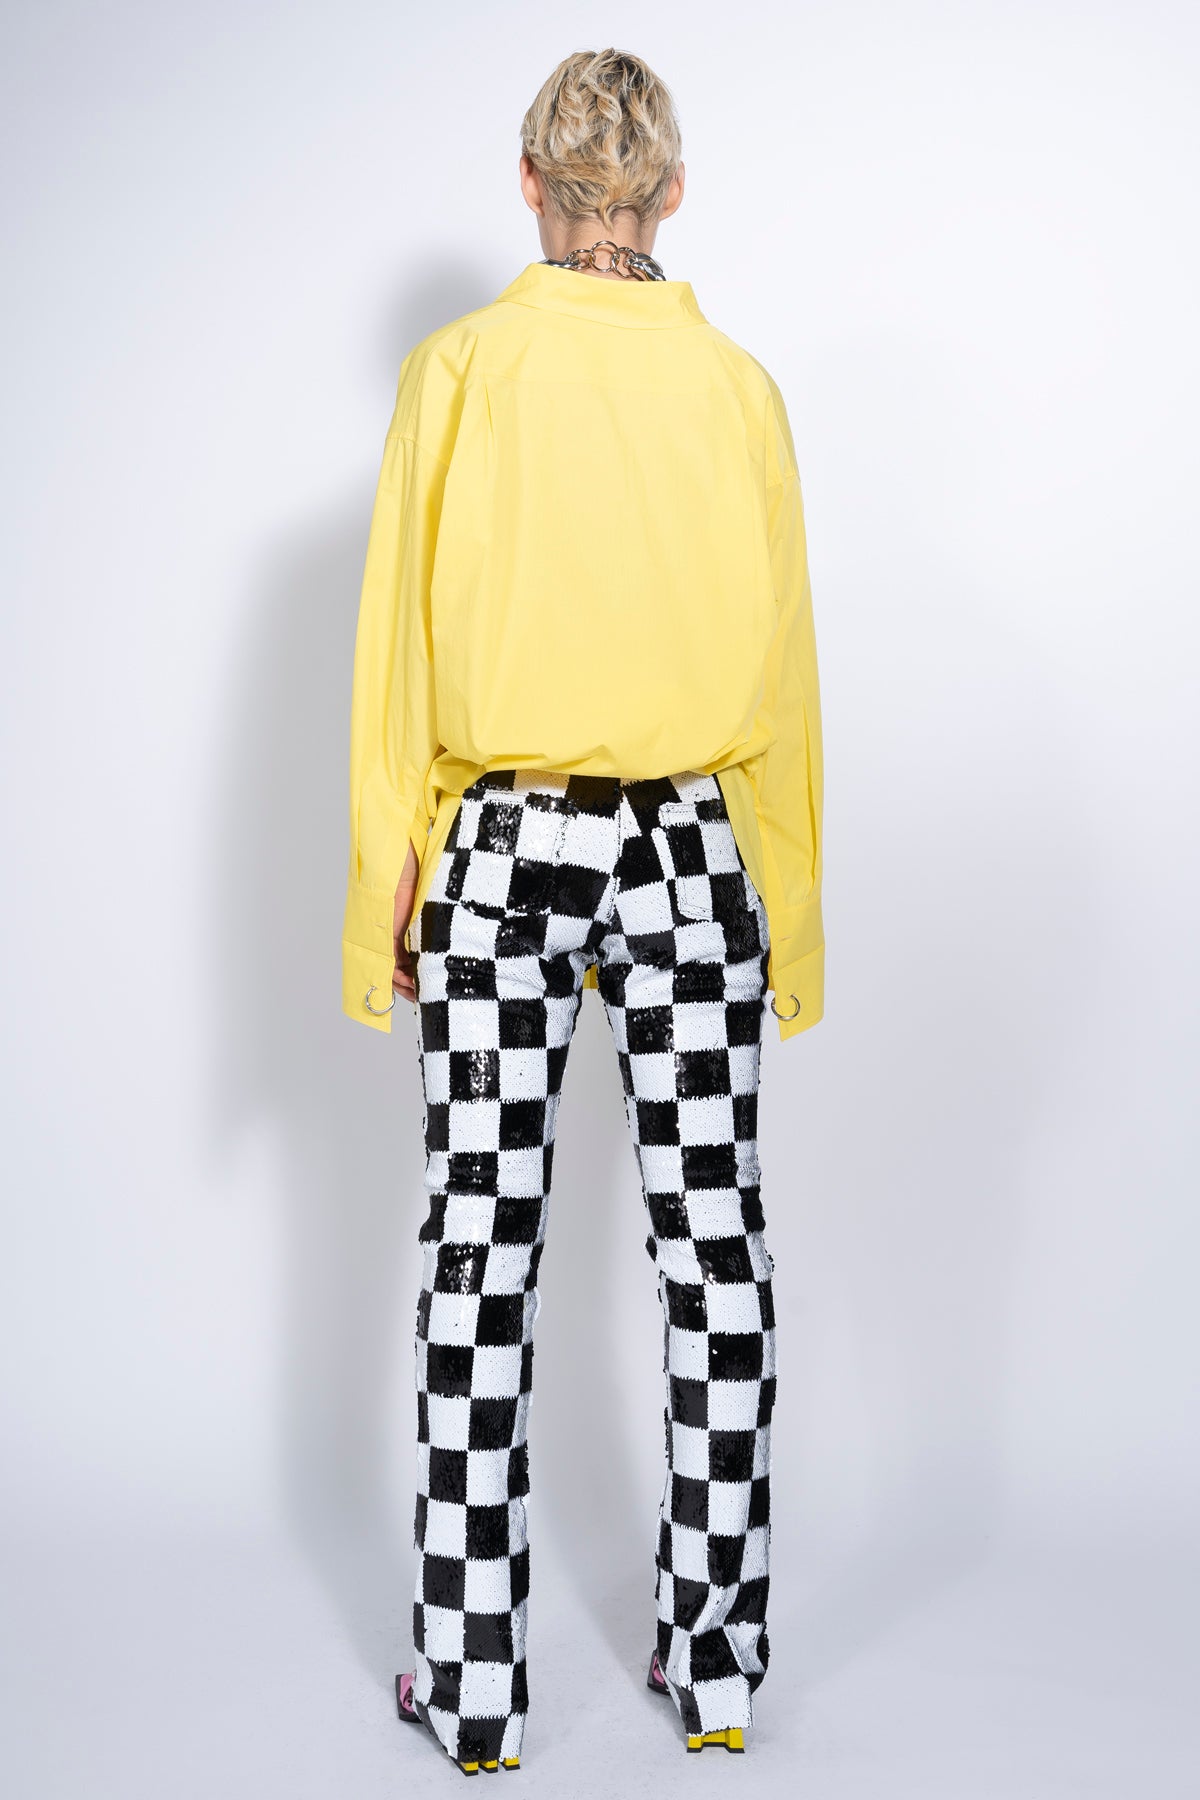 CHECKED SEQUINS BOOTCUT TROUSERS marques almeida